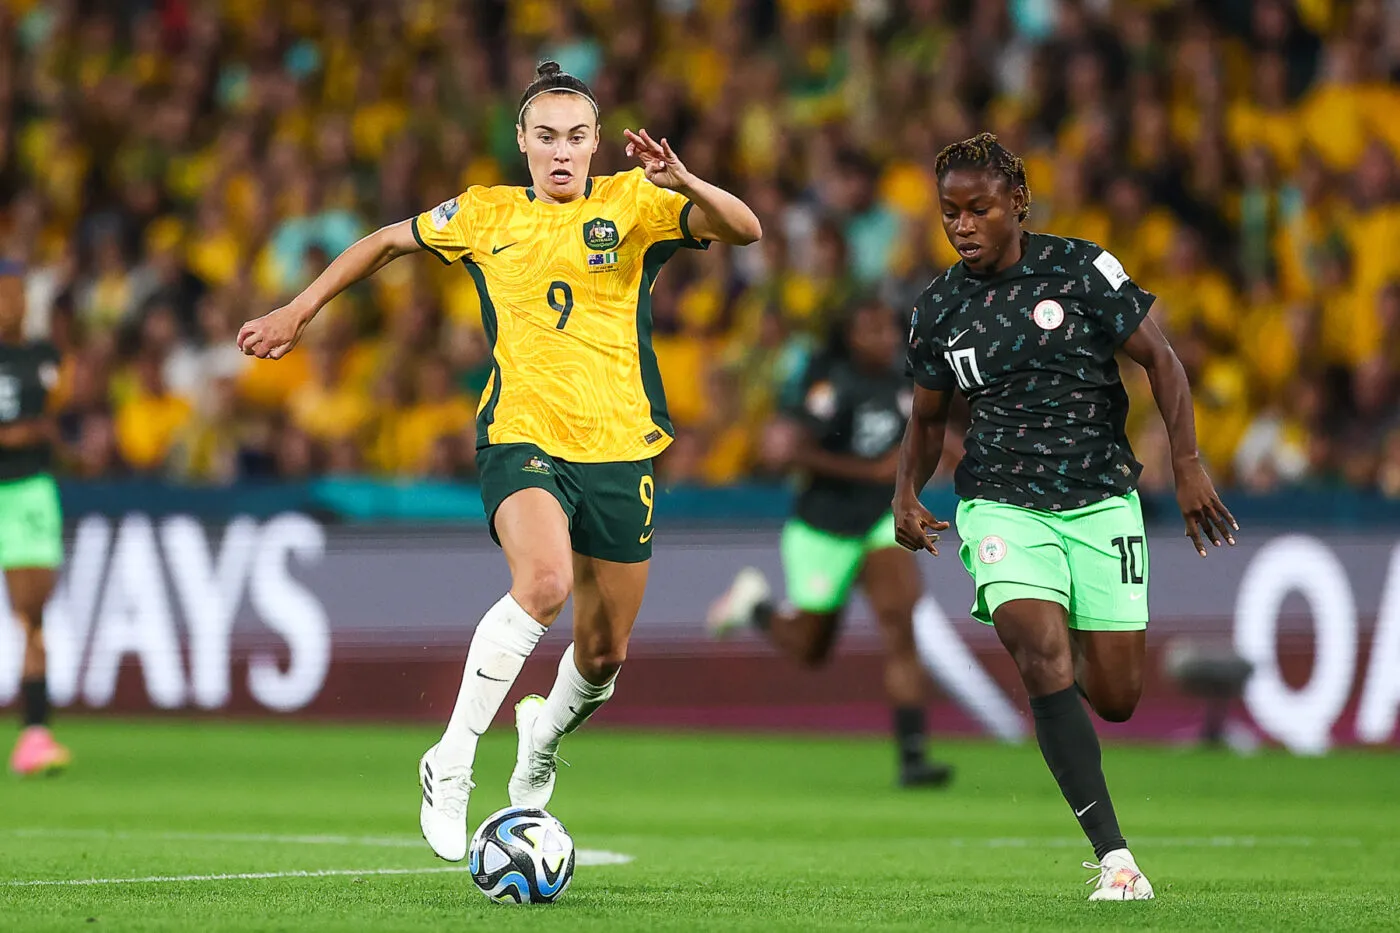 Christy Ucheibe #10 of Nigeria pressures Caitlin Foord #9 of Australia during the FIFA Women's World Cup 2023 Group B match Australia Women vs Nigeria Women at Suncorp Stadium, Brisbane, Australia, 27th July 2023 (Photo by Patrick Hoelscher/News Images) in , on 7/27/2023. (Photo by Patrick Hoelscher/News Images/Sipa USA) - Photo by Icon sport